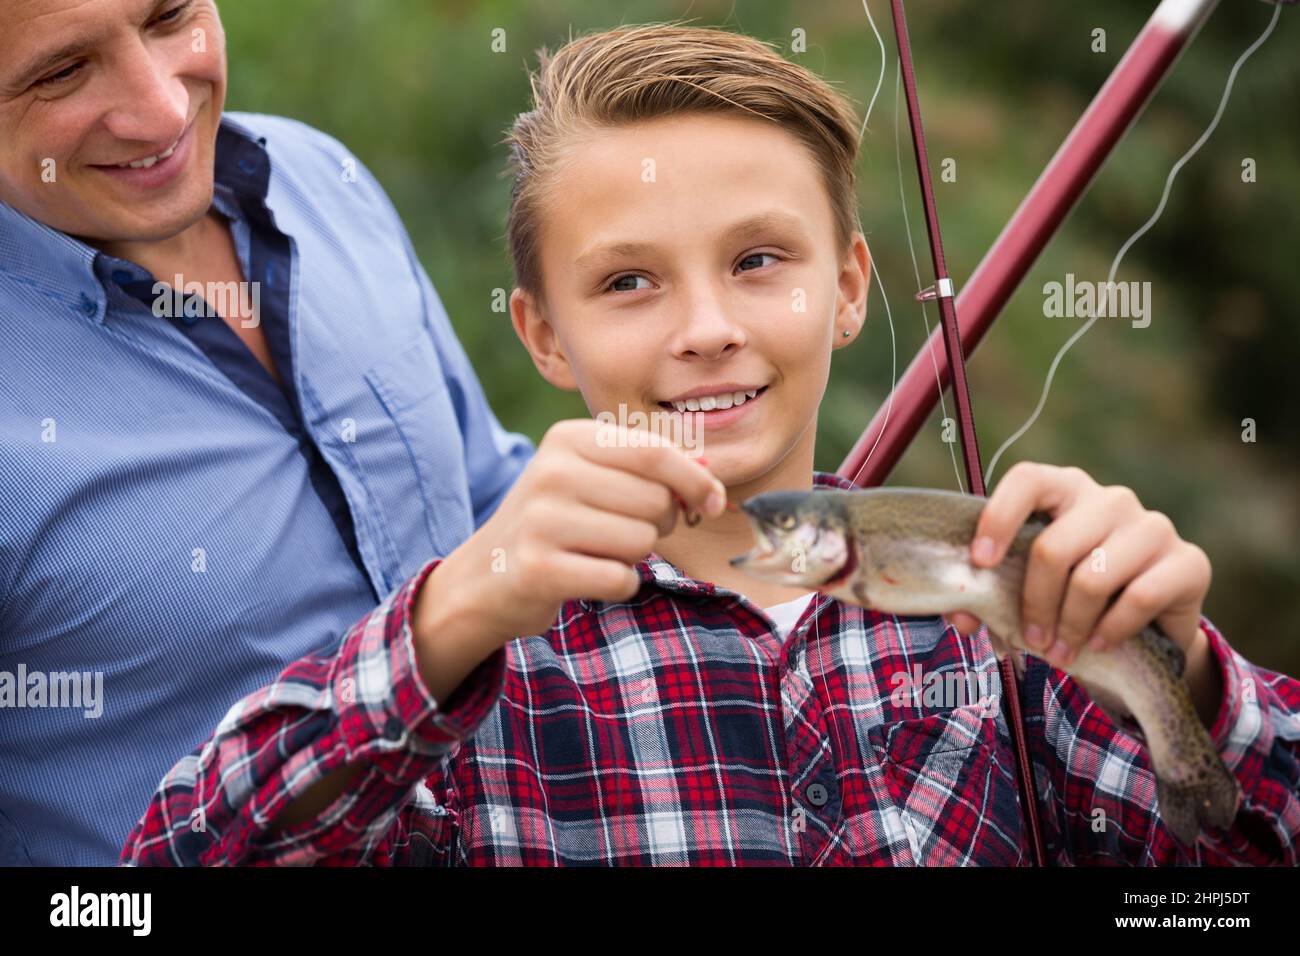 Happy man with son looking at fish on hook Stock Photo